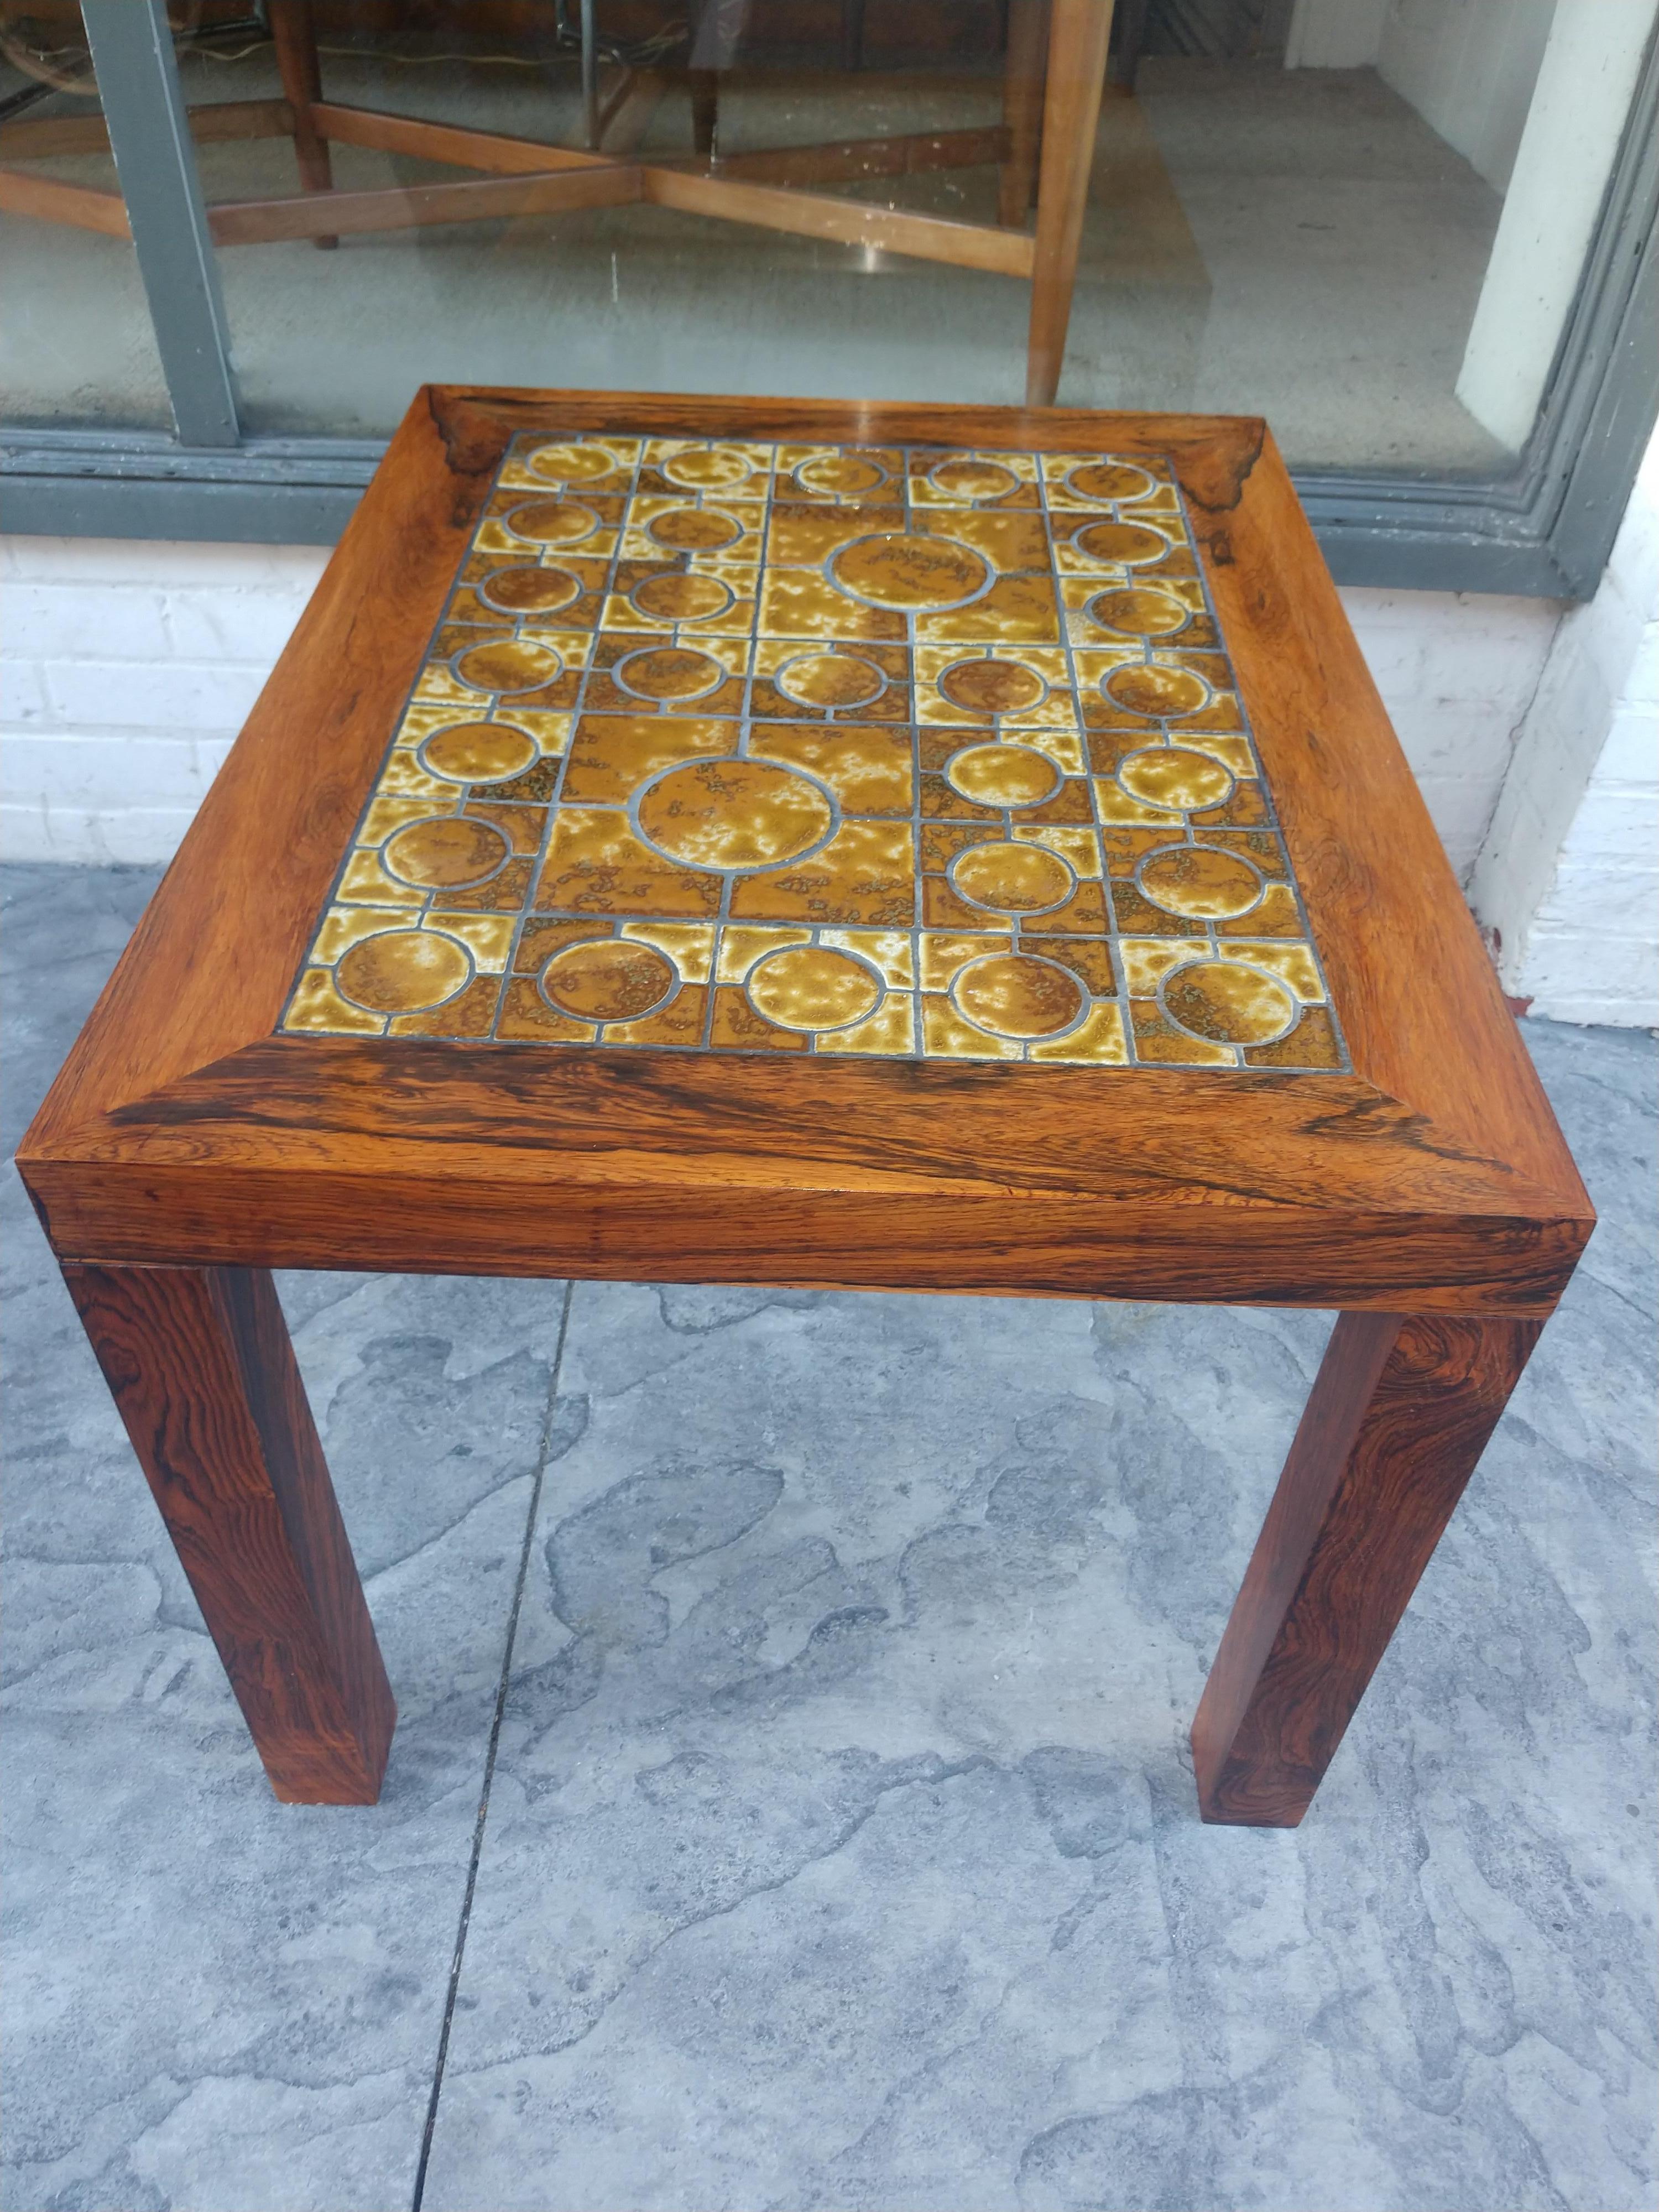 Pair of Mid Century Danish Modern Rosewood End Tables with Inset Tile Tops For Sale 1